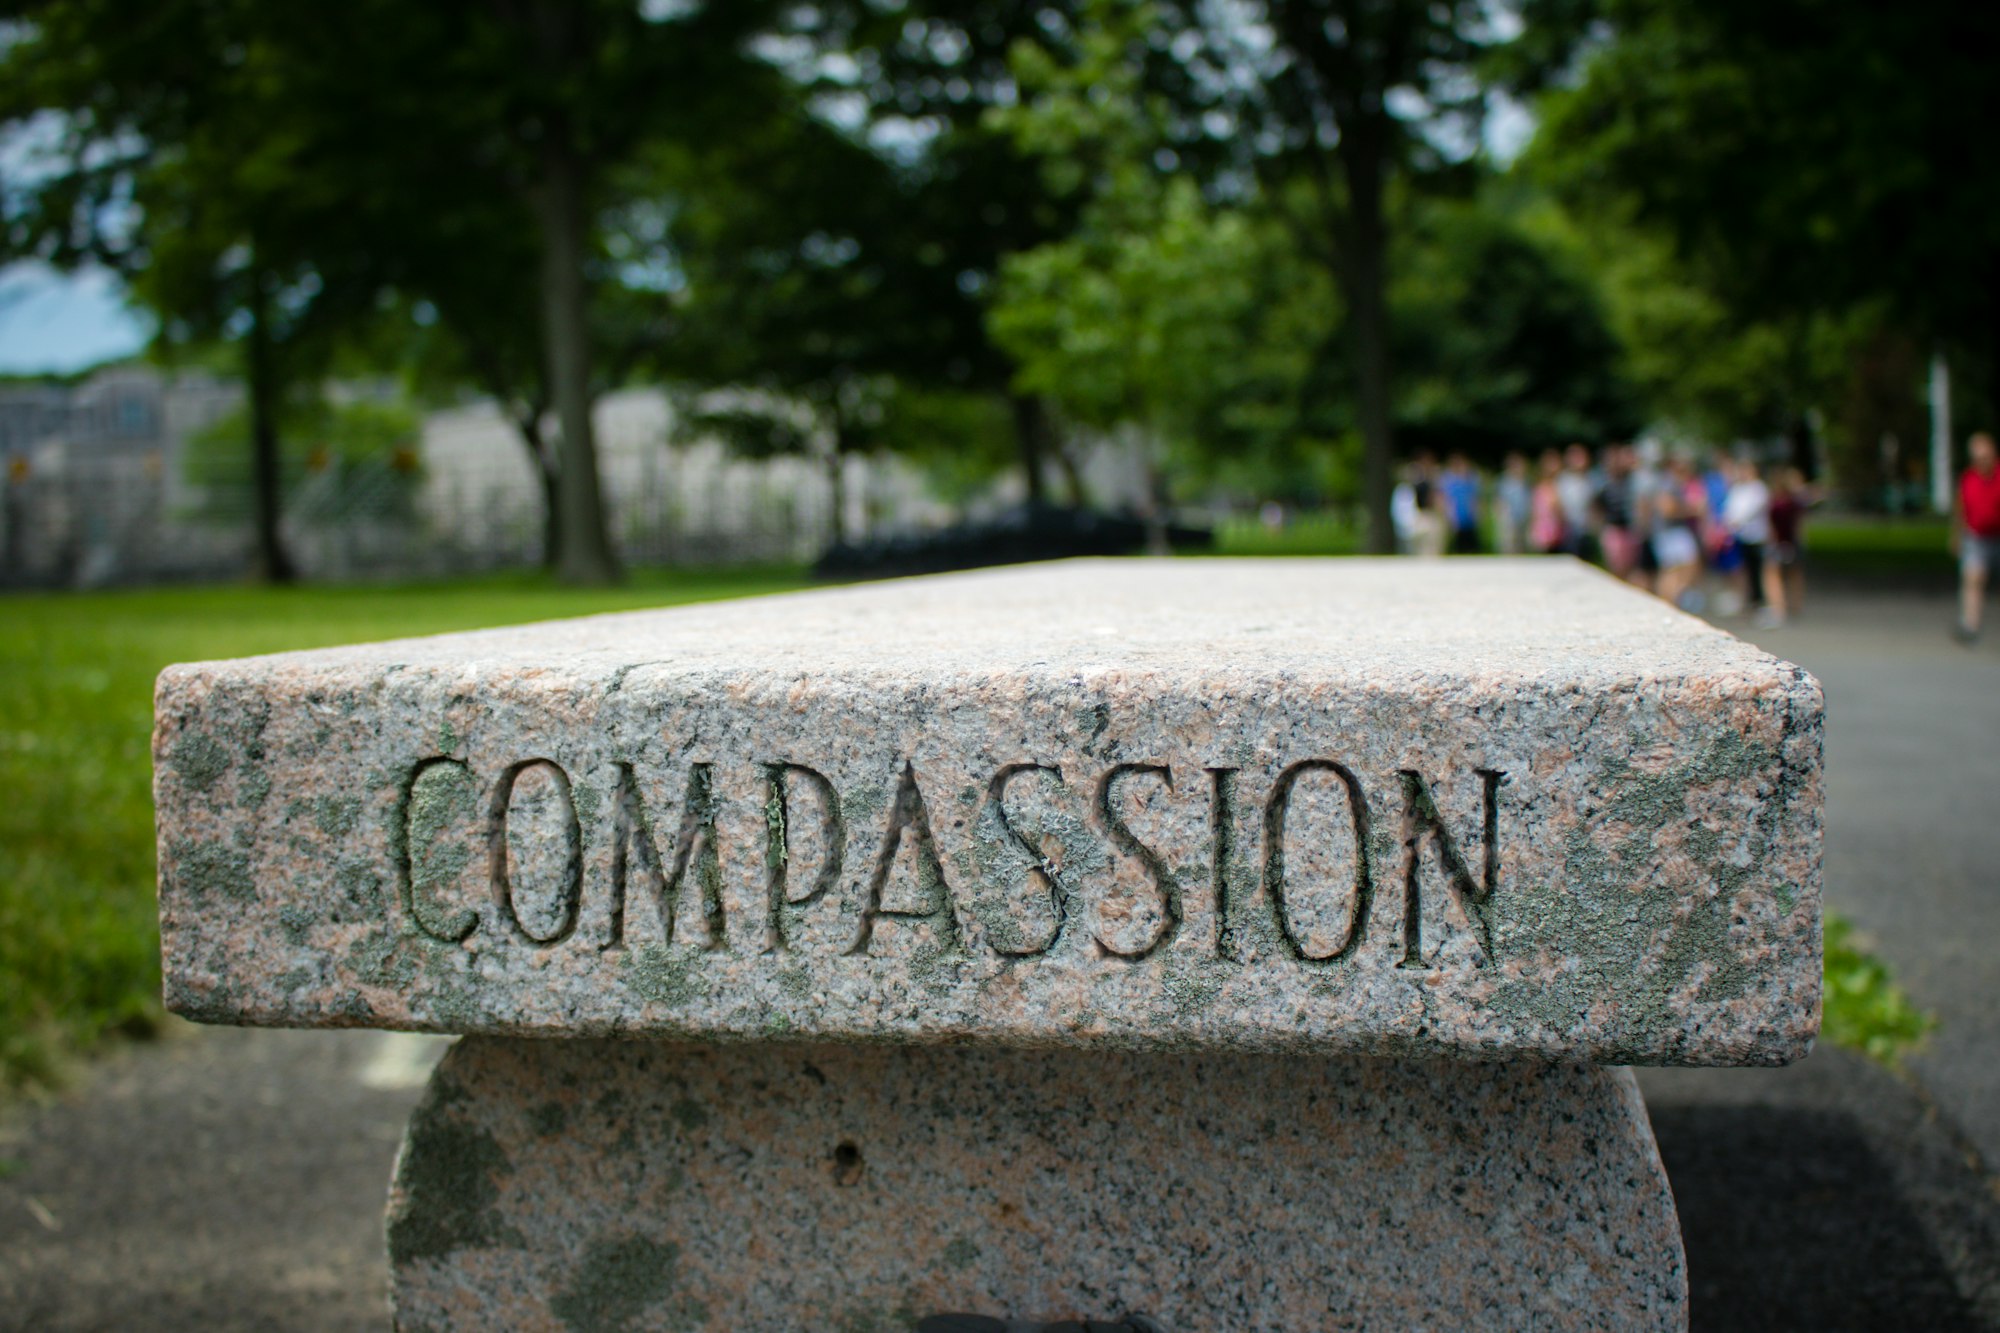 "Compassion" Bench near Trophy Point at West Point